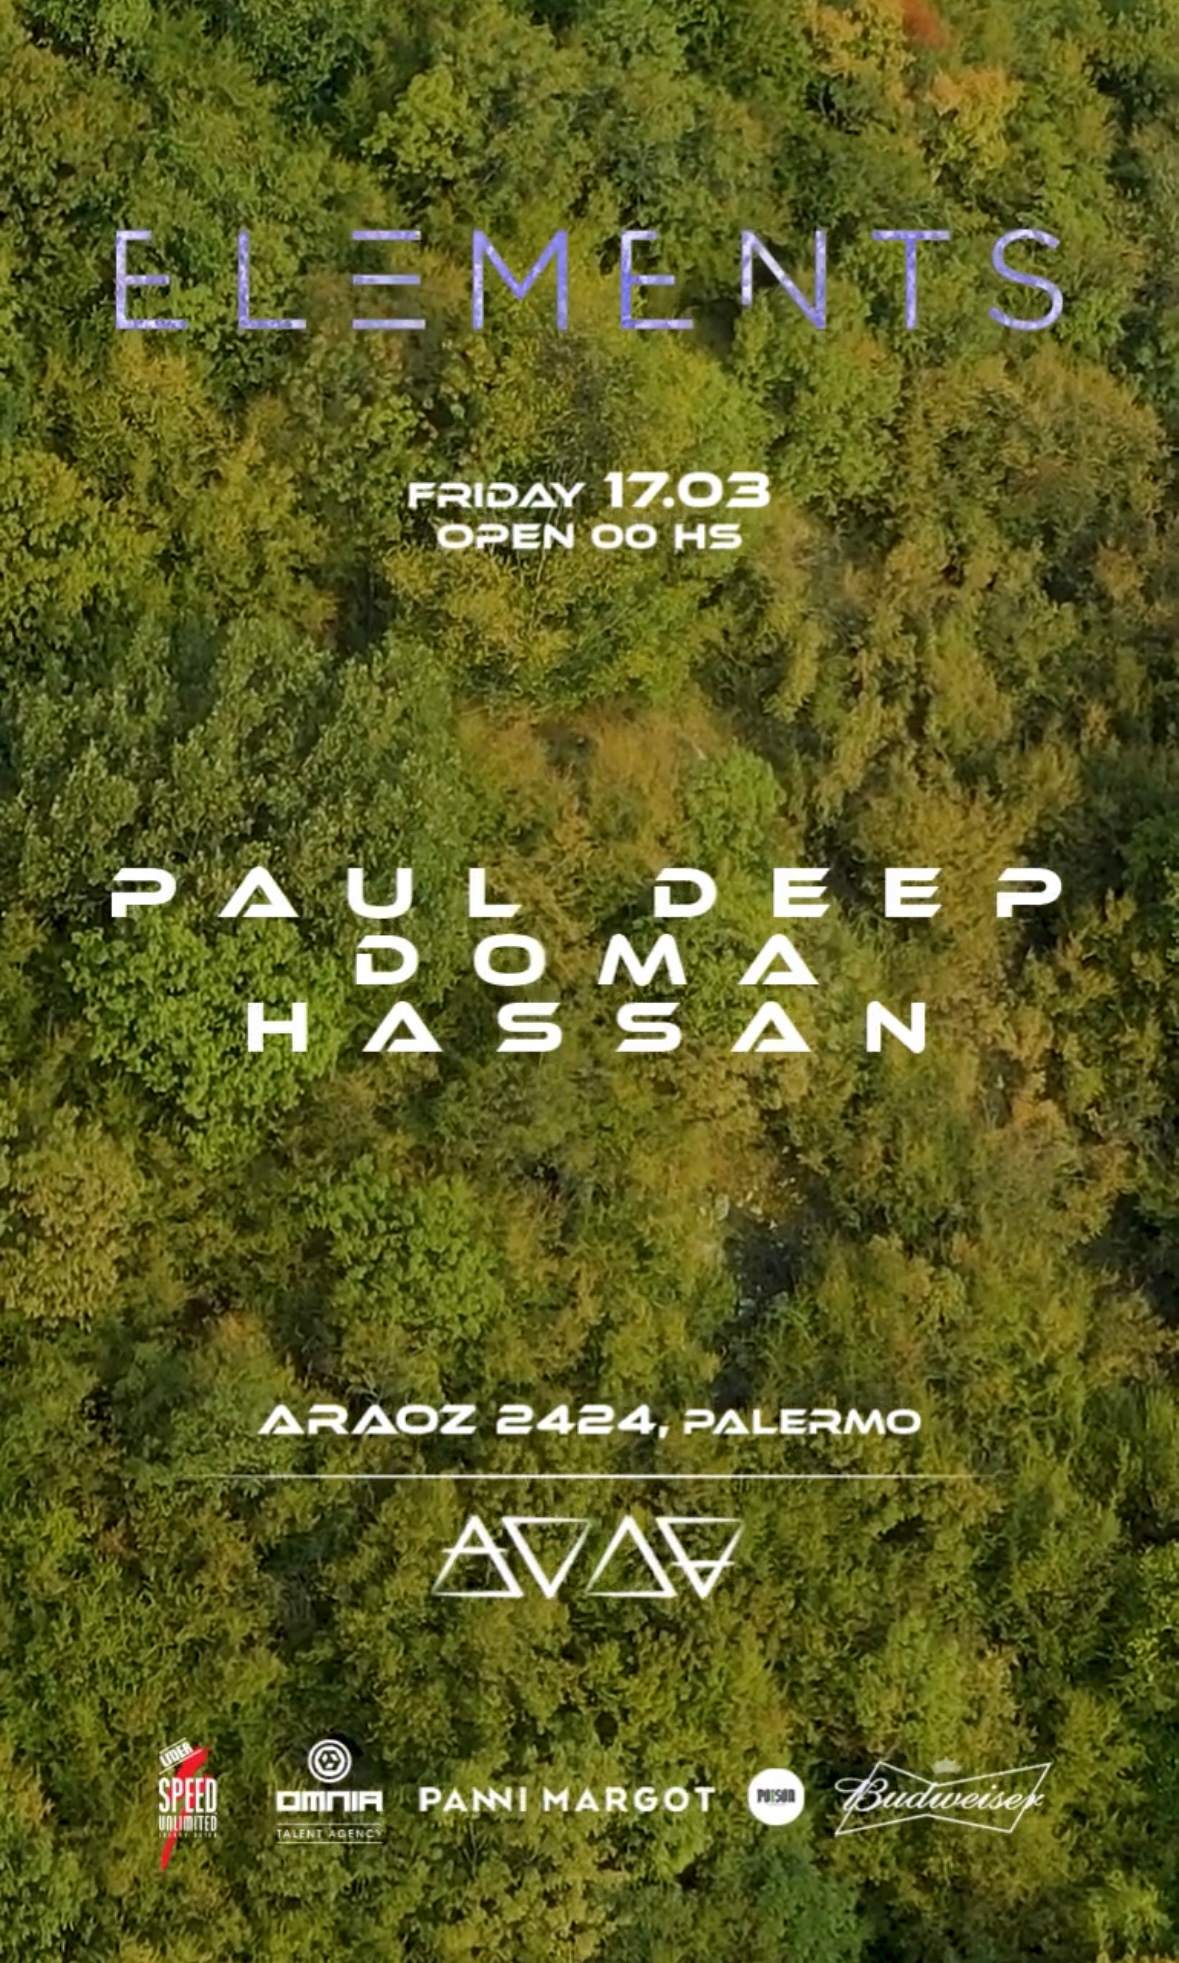 Elements Club Pres. Paul Deep, Doma, Hassan - フライヤー表